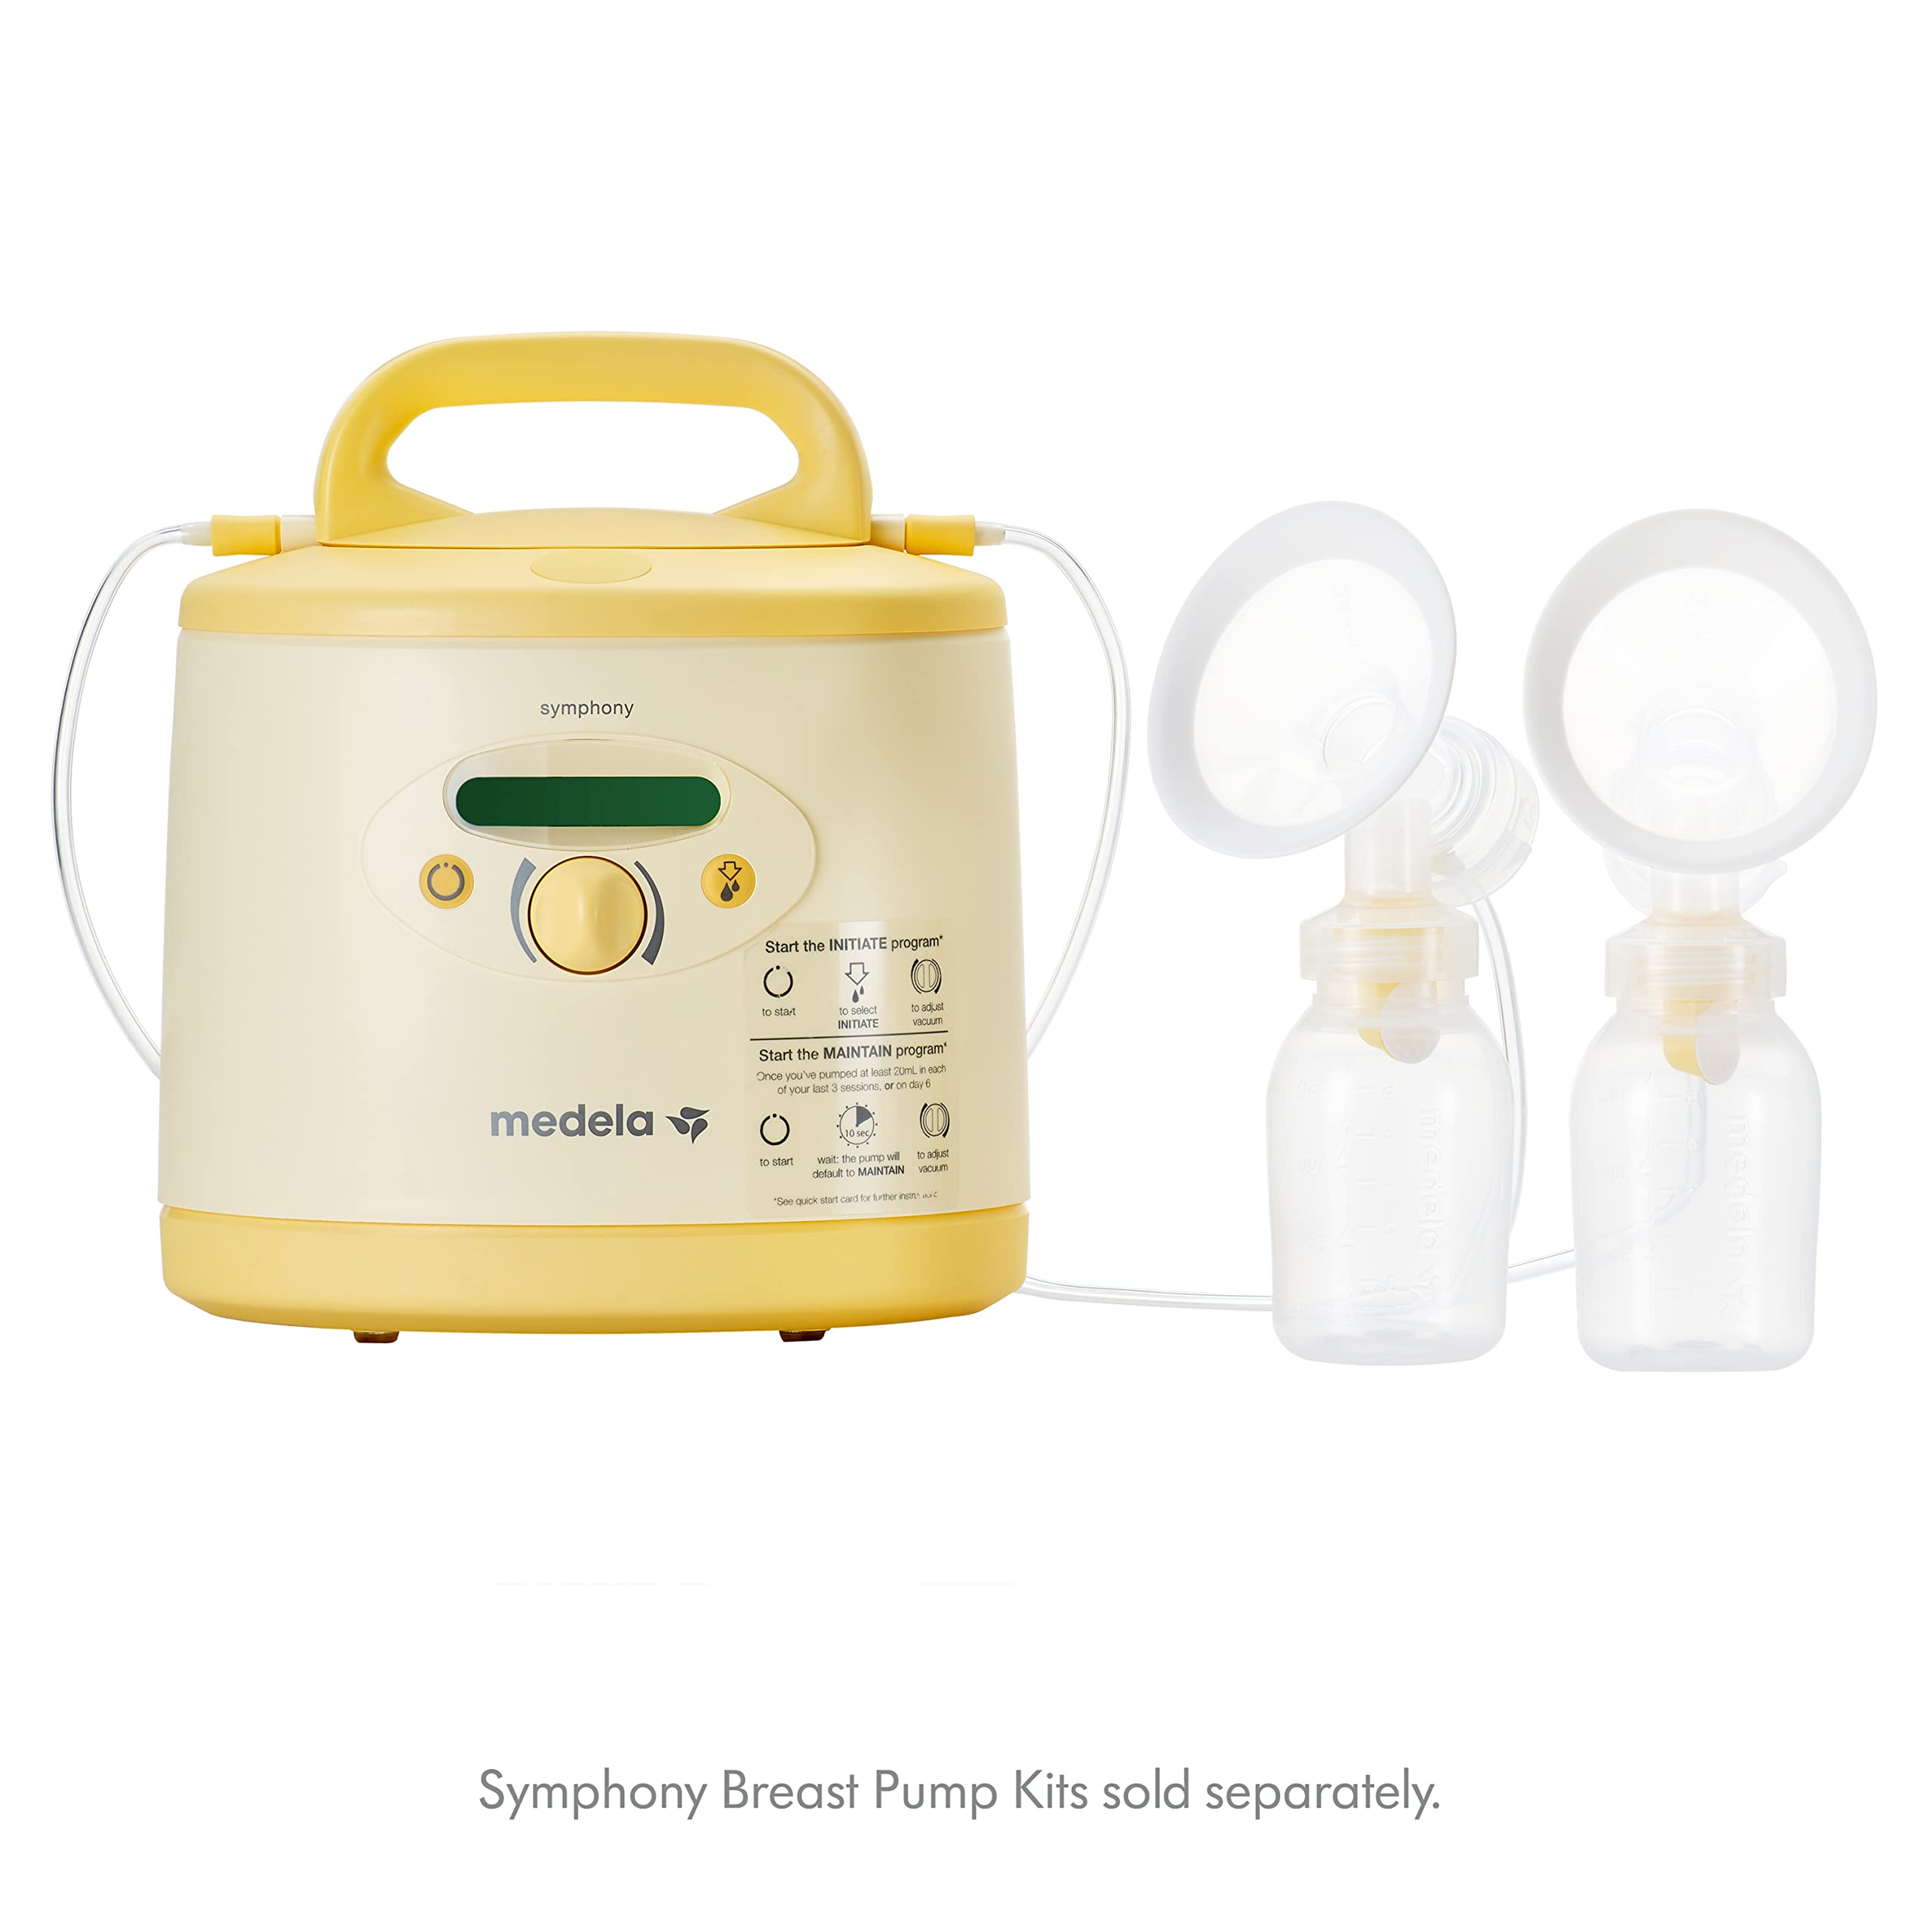 Medela Symphony Plus Breast Pump & Breast Milk Storage Solution Set, Breastfeeding Supplies & Containers, Breastmilk Organizer, Made Without BPA